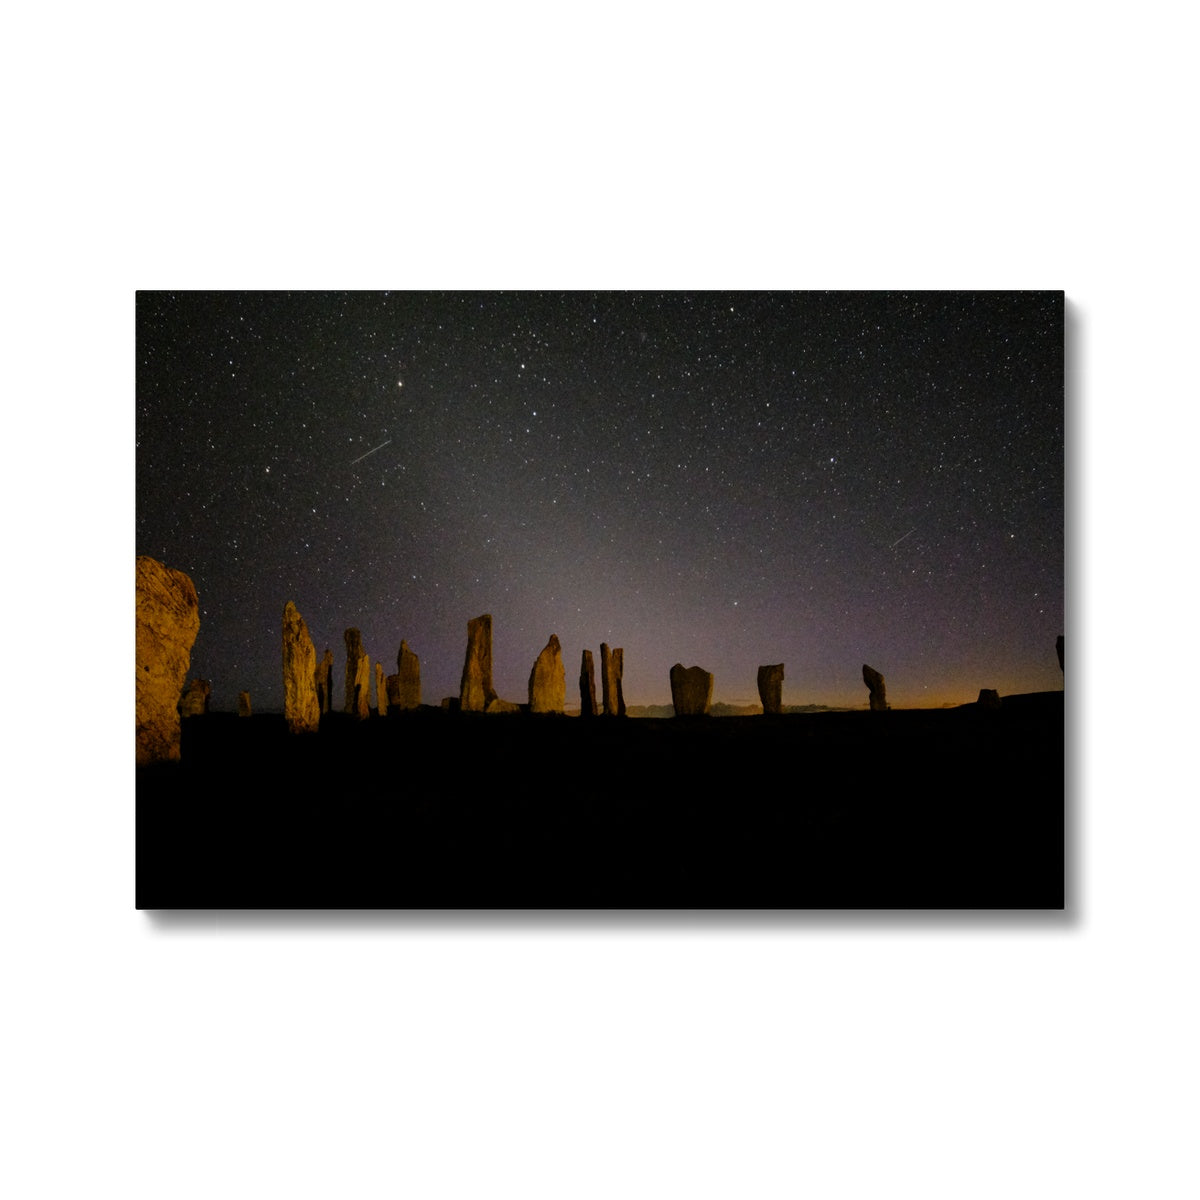 Callanish and Zodiacal light Canvas